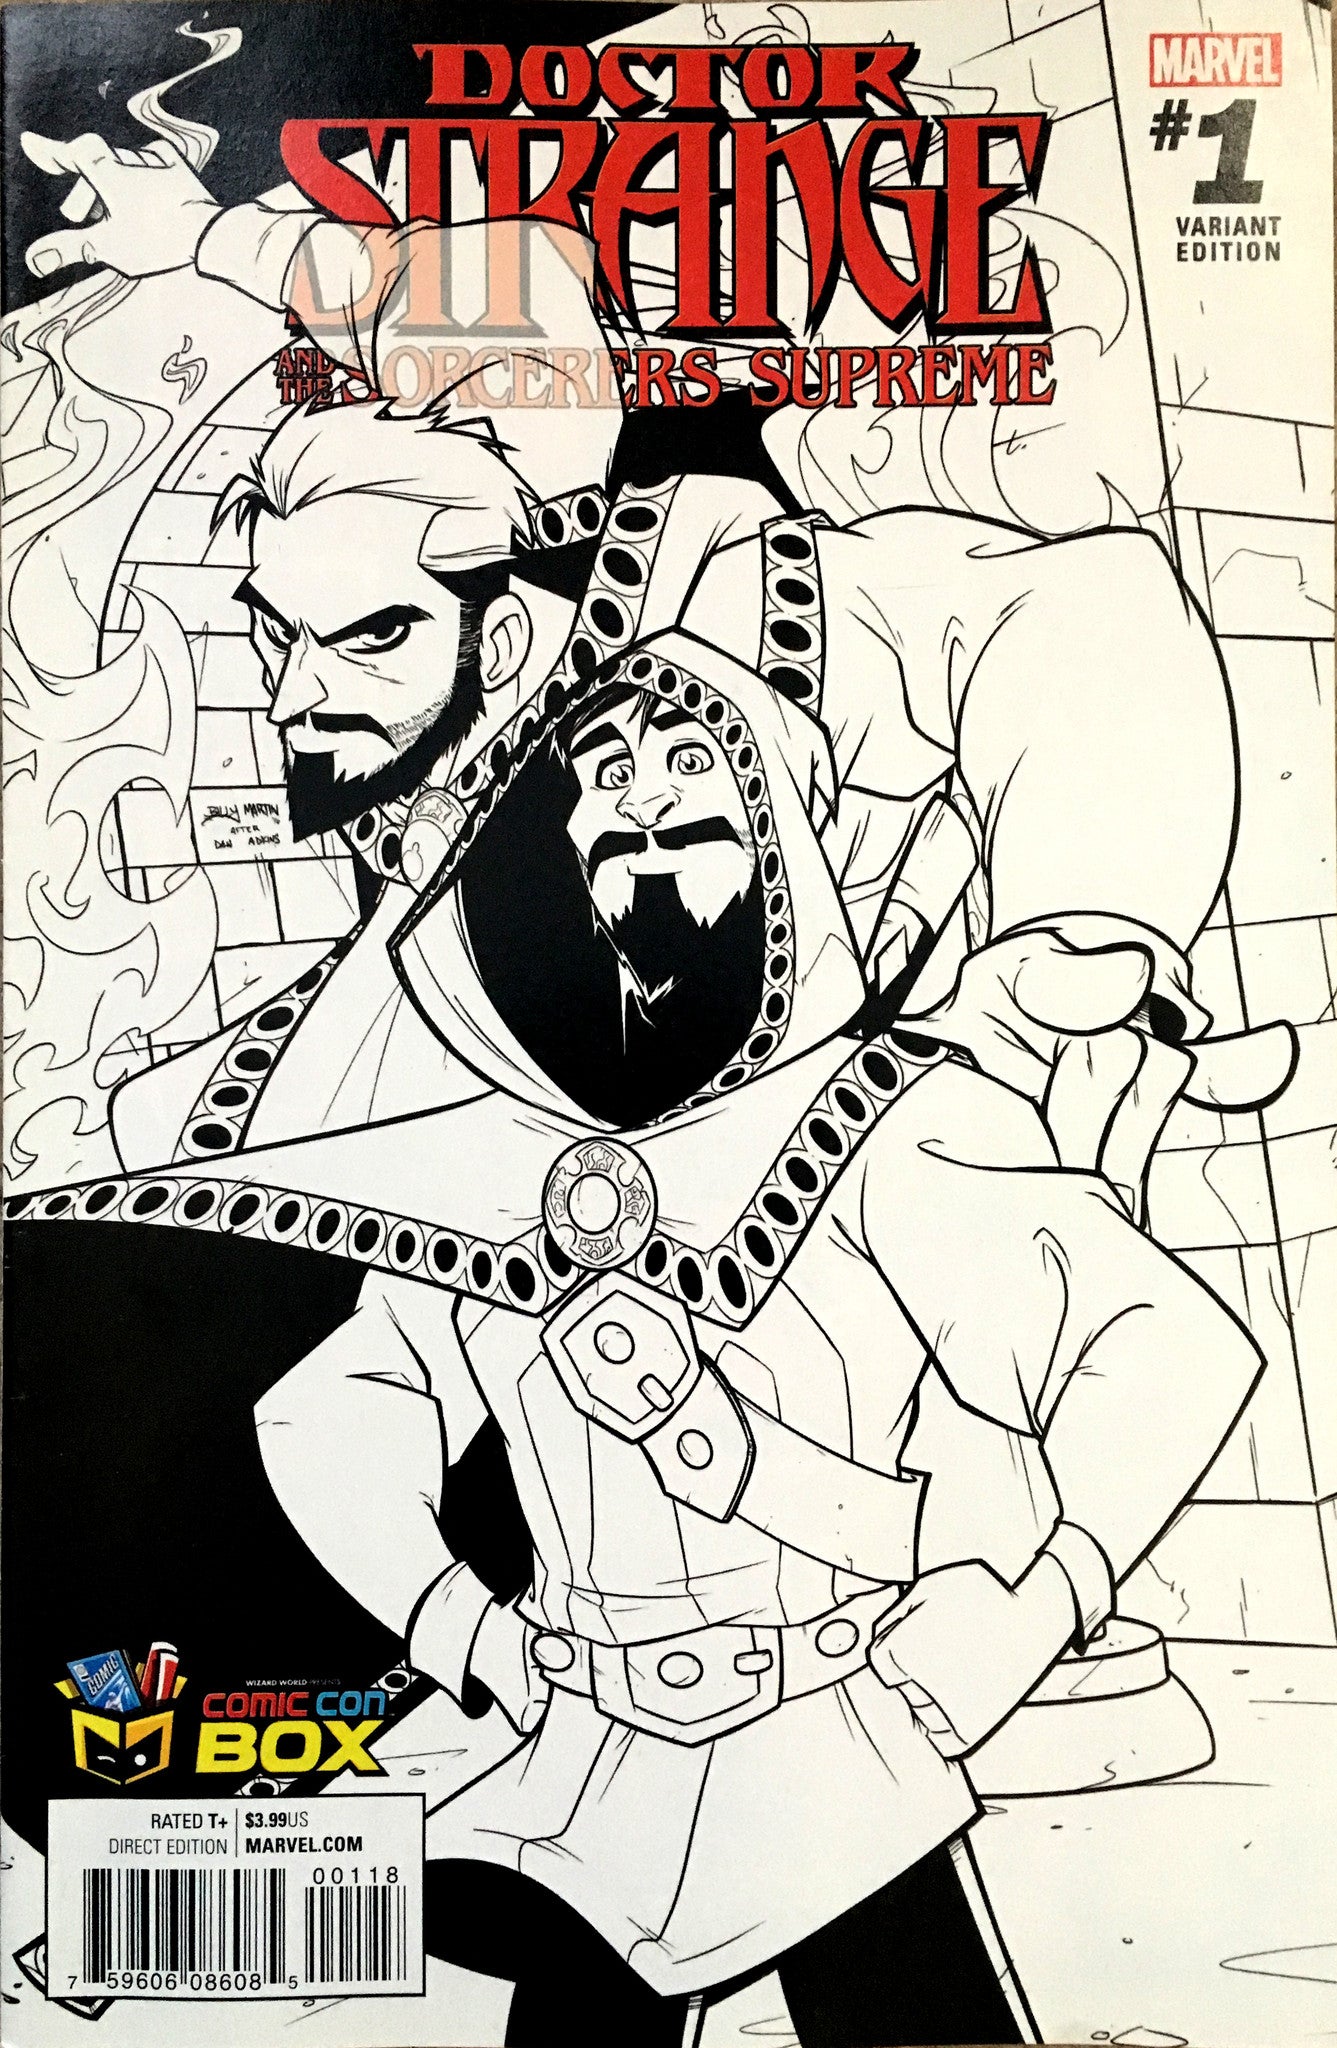 B/W Dr. Strange and the Sorcerers Supreme #1 Variant cover (signed)